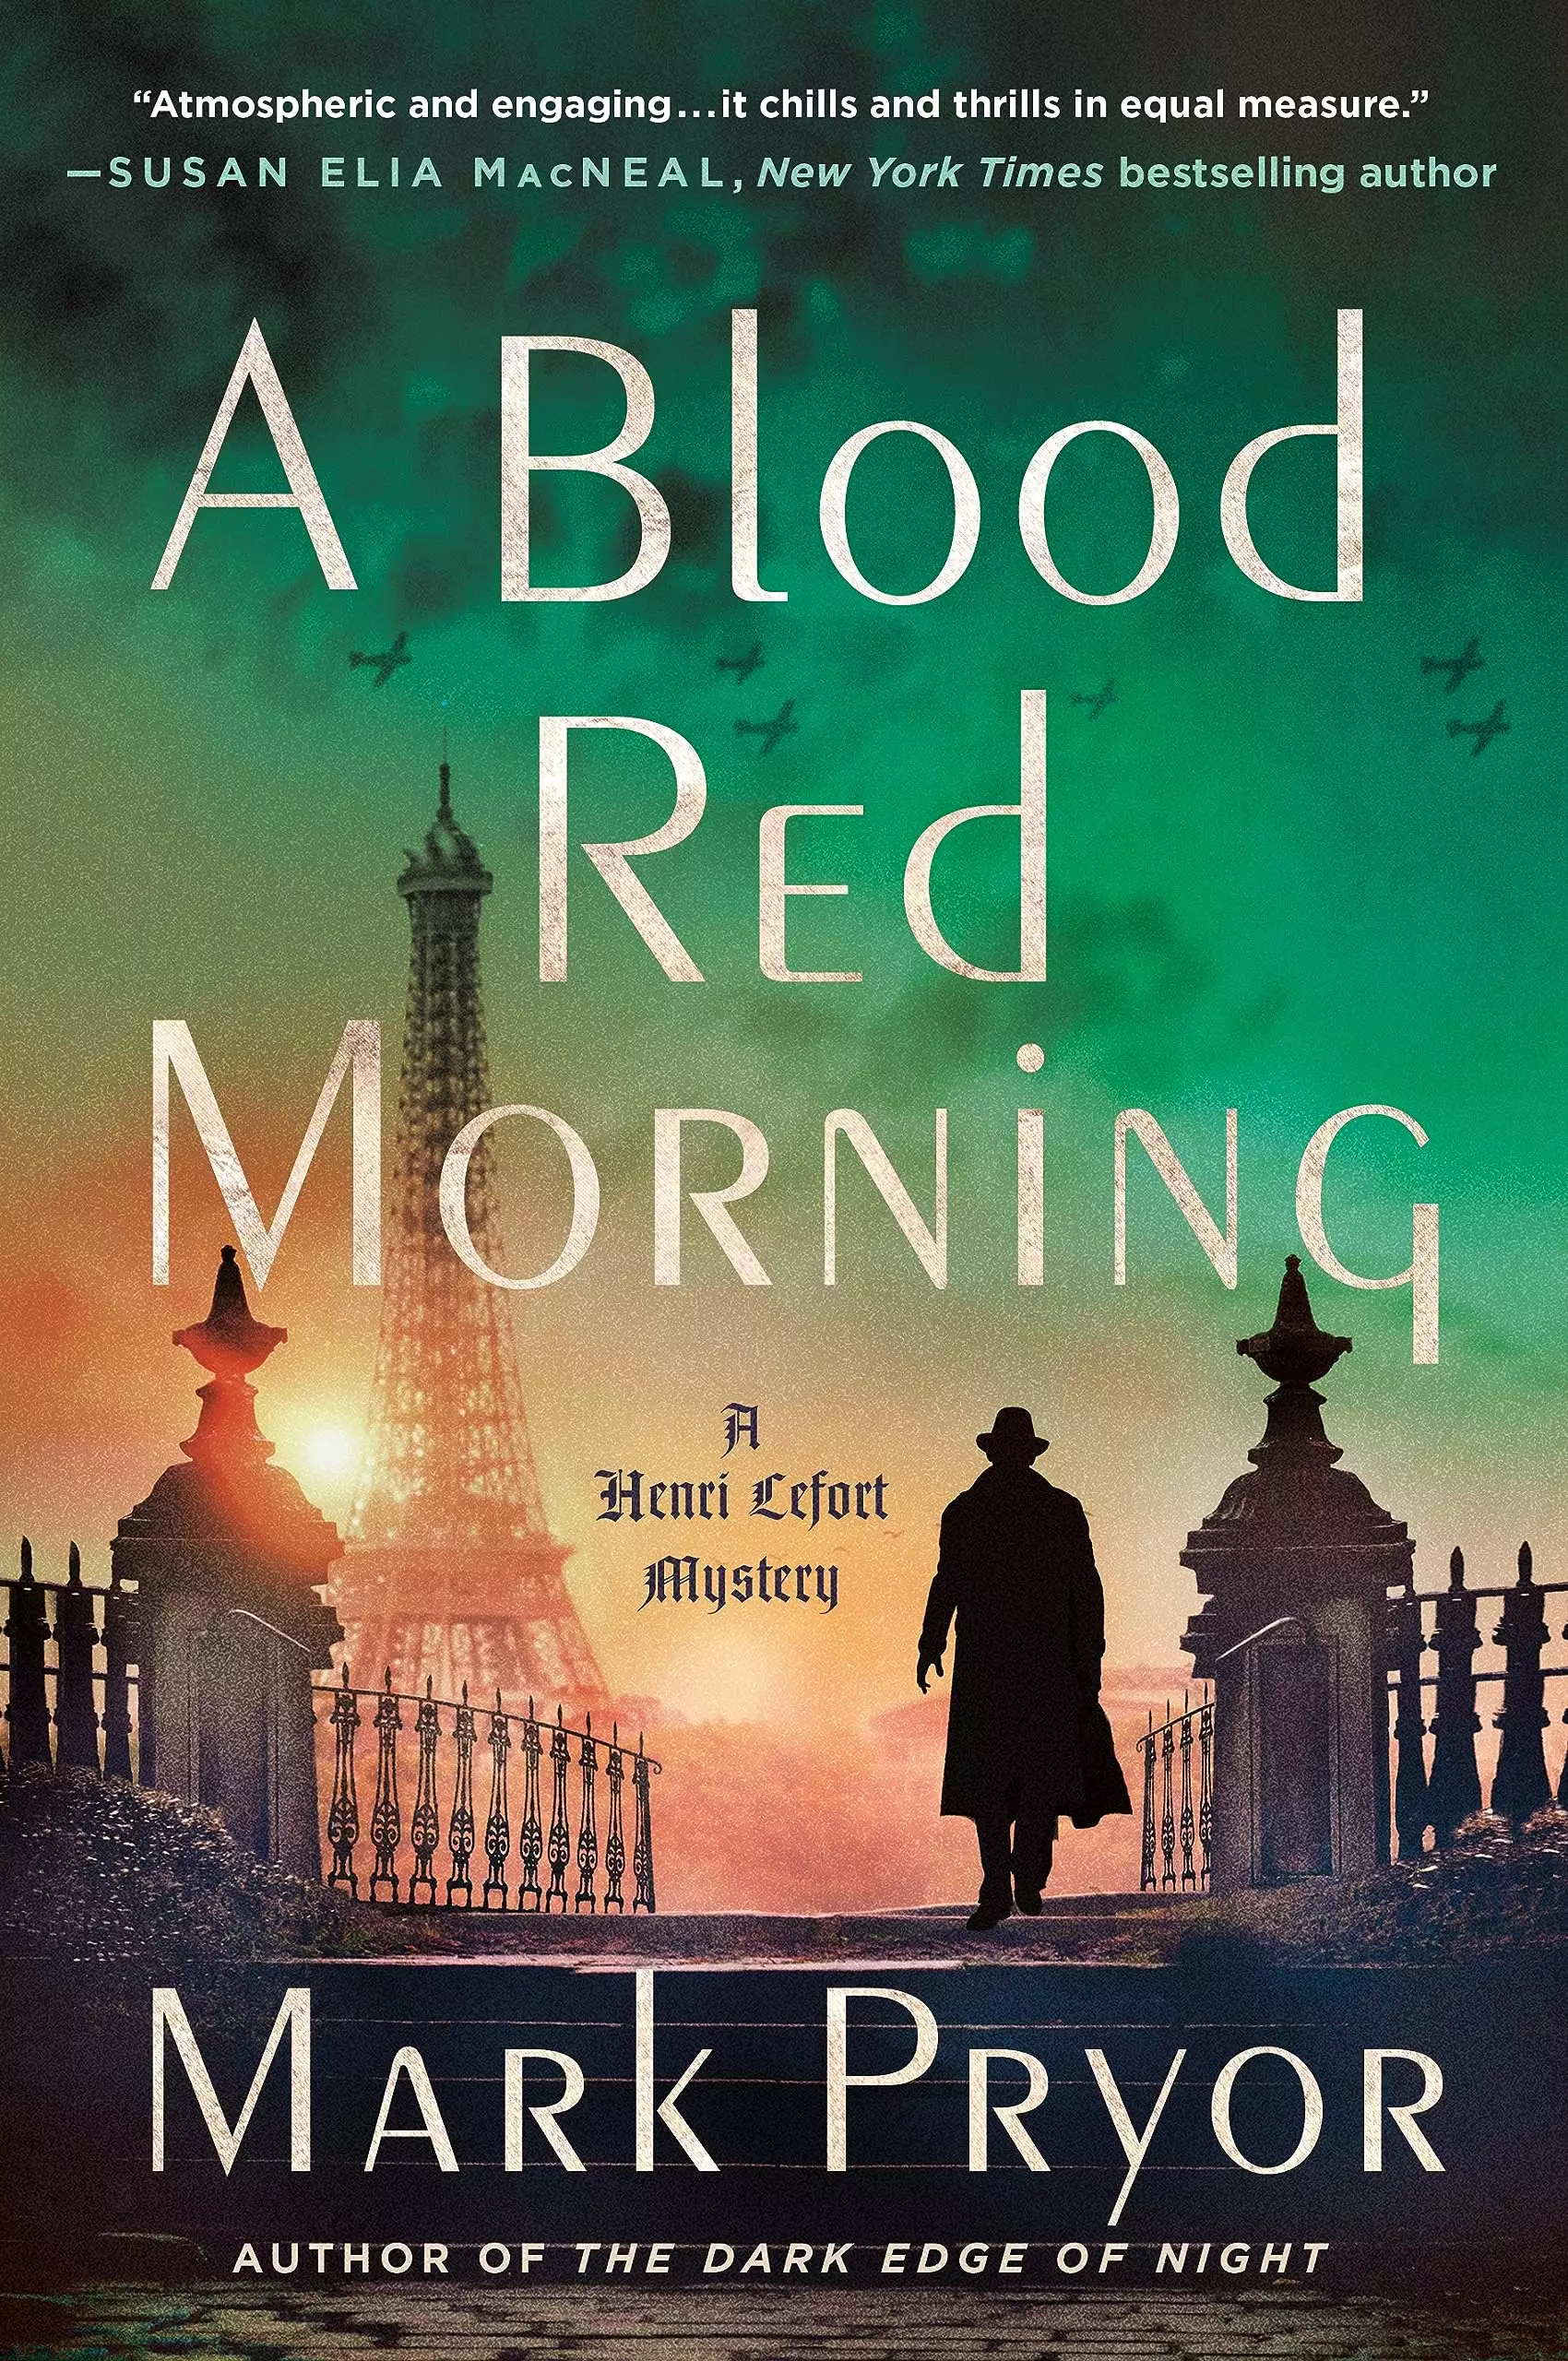 A Blood Red Morning